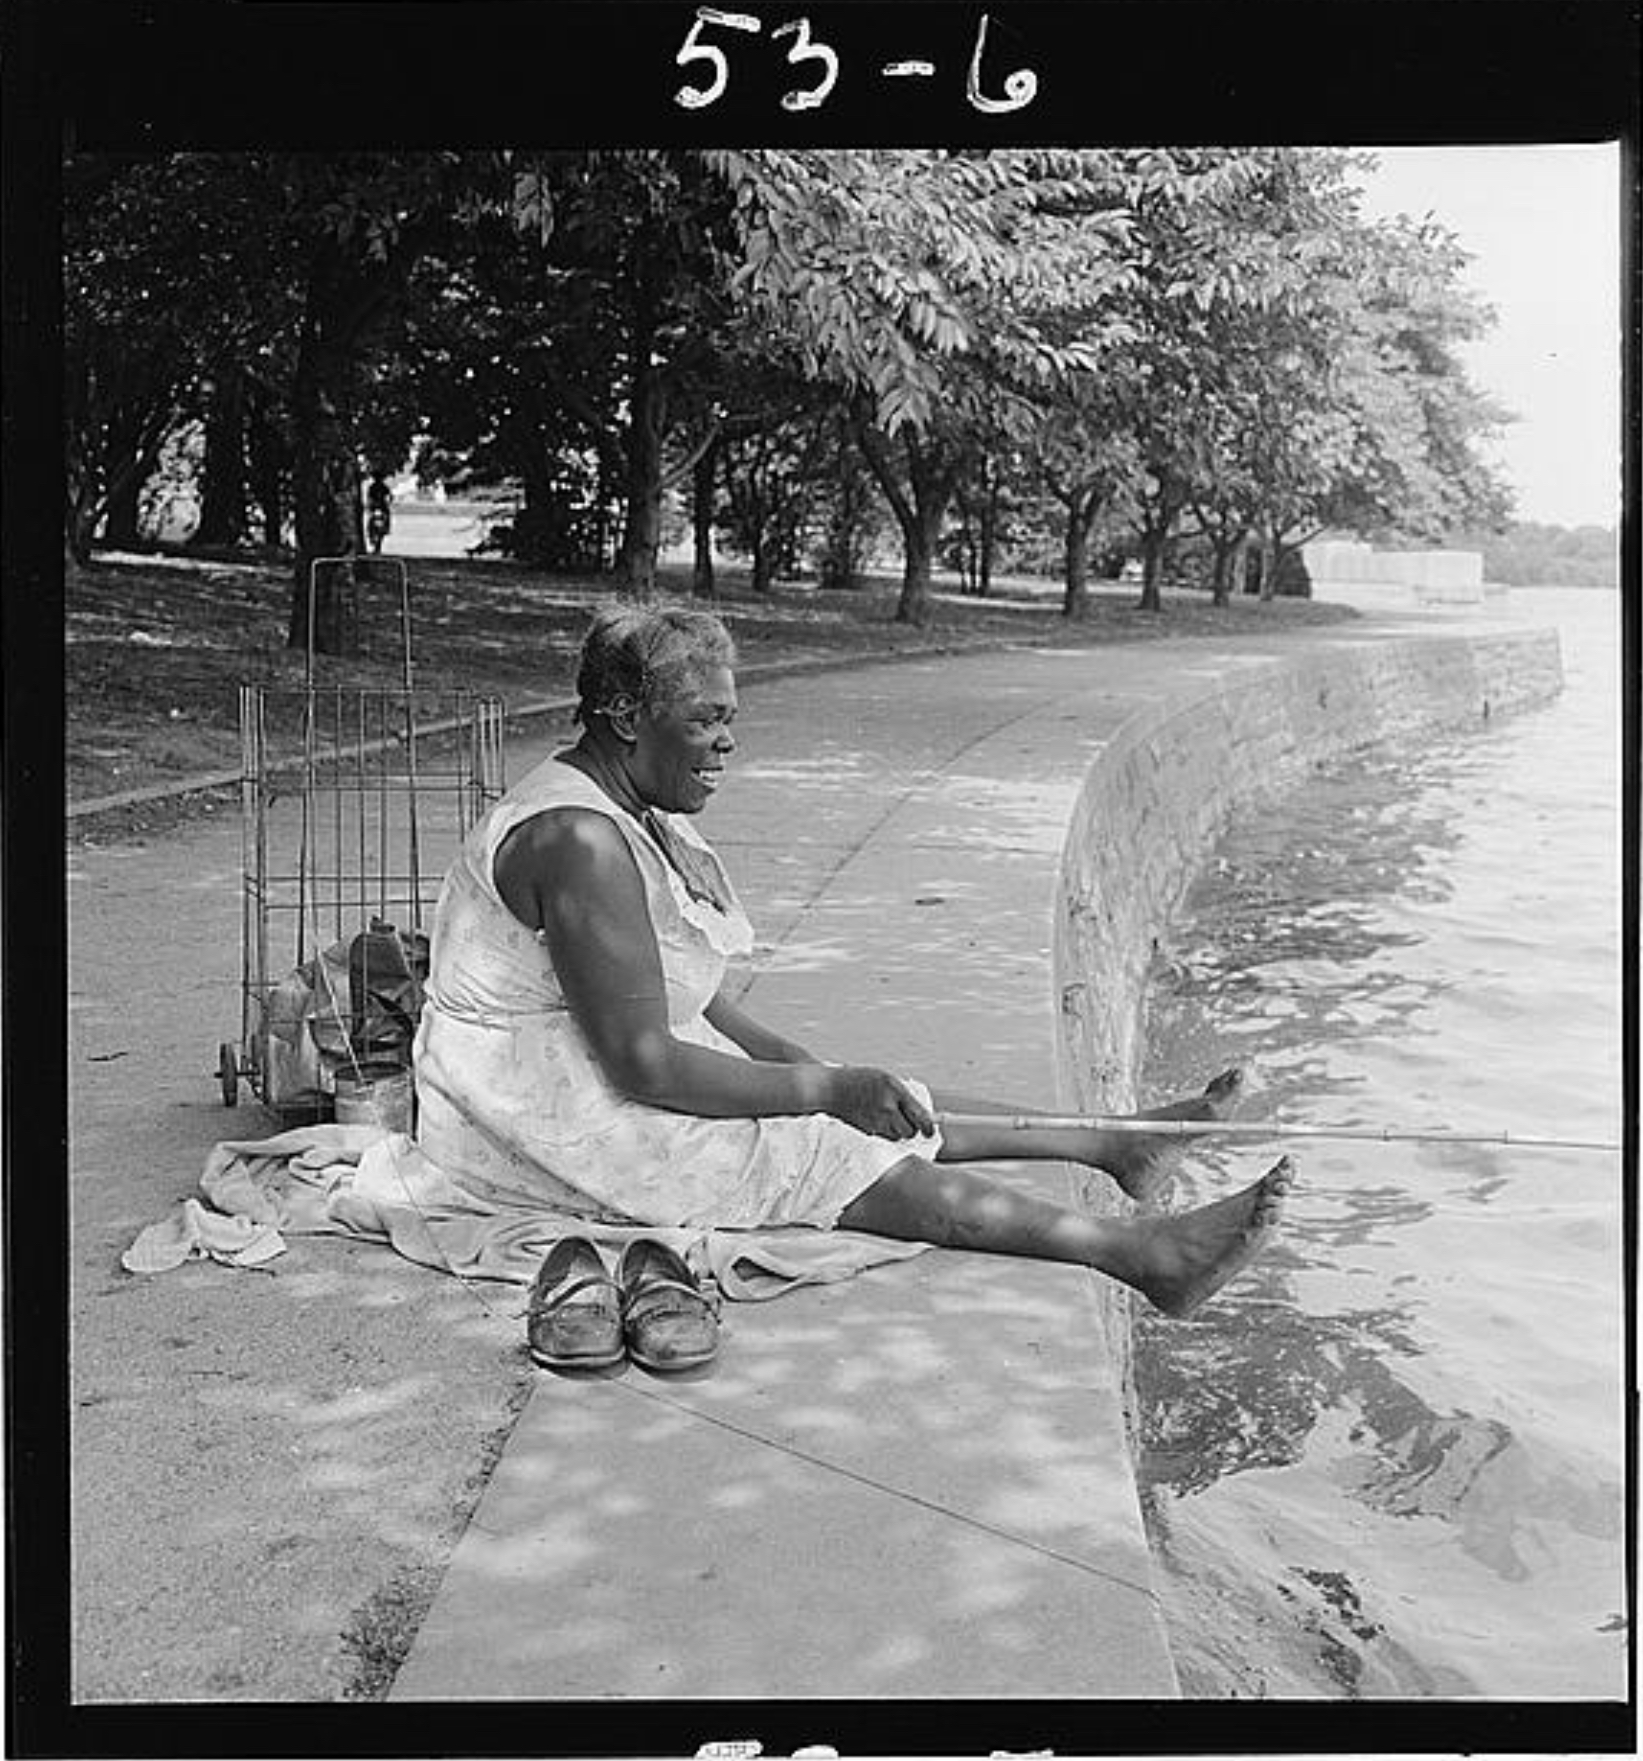 [African American woman, seated on ground, fishing, at the Tidal Basin, Washington, D.C.]  - Library of Congress  (1957)